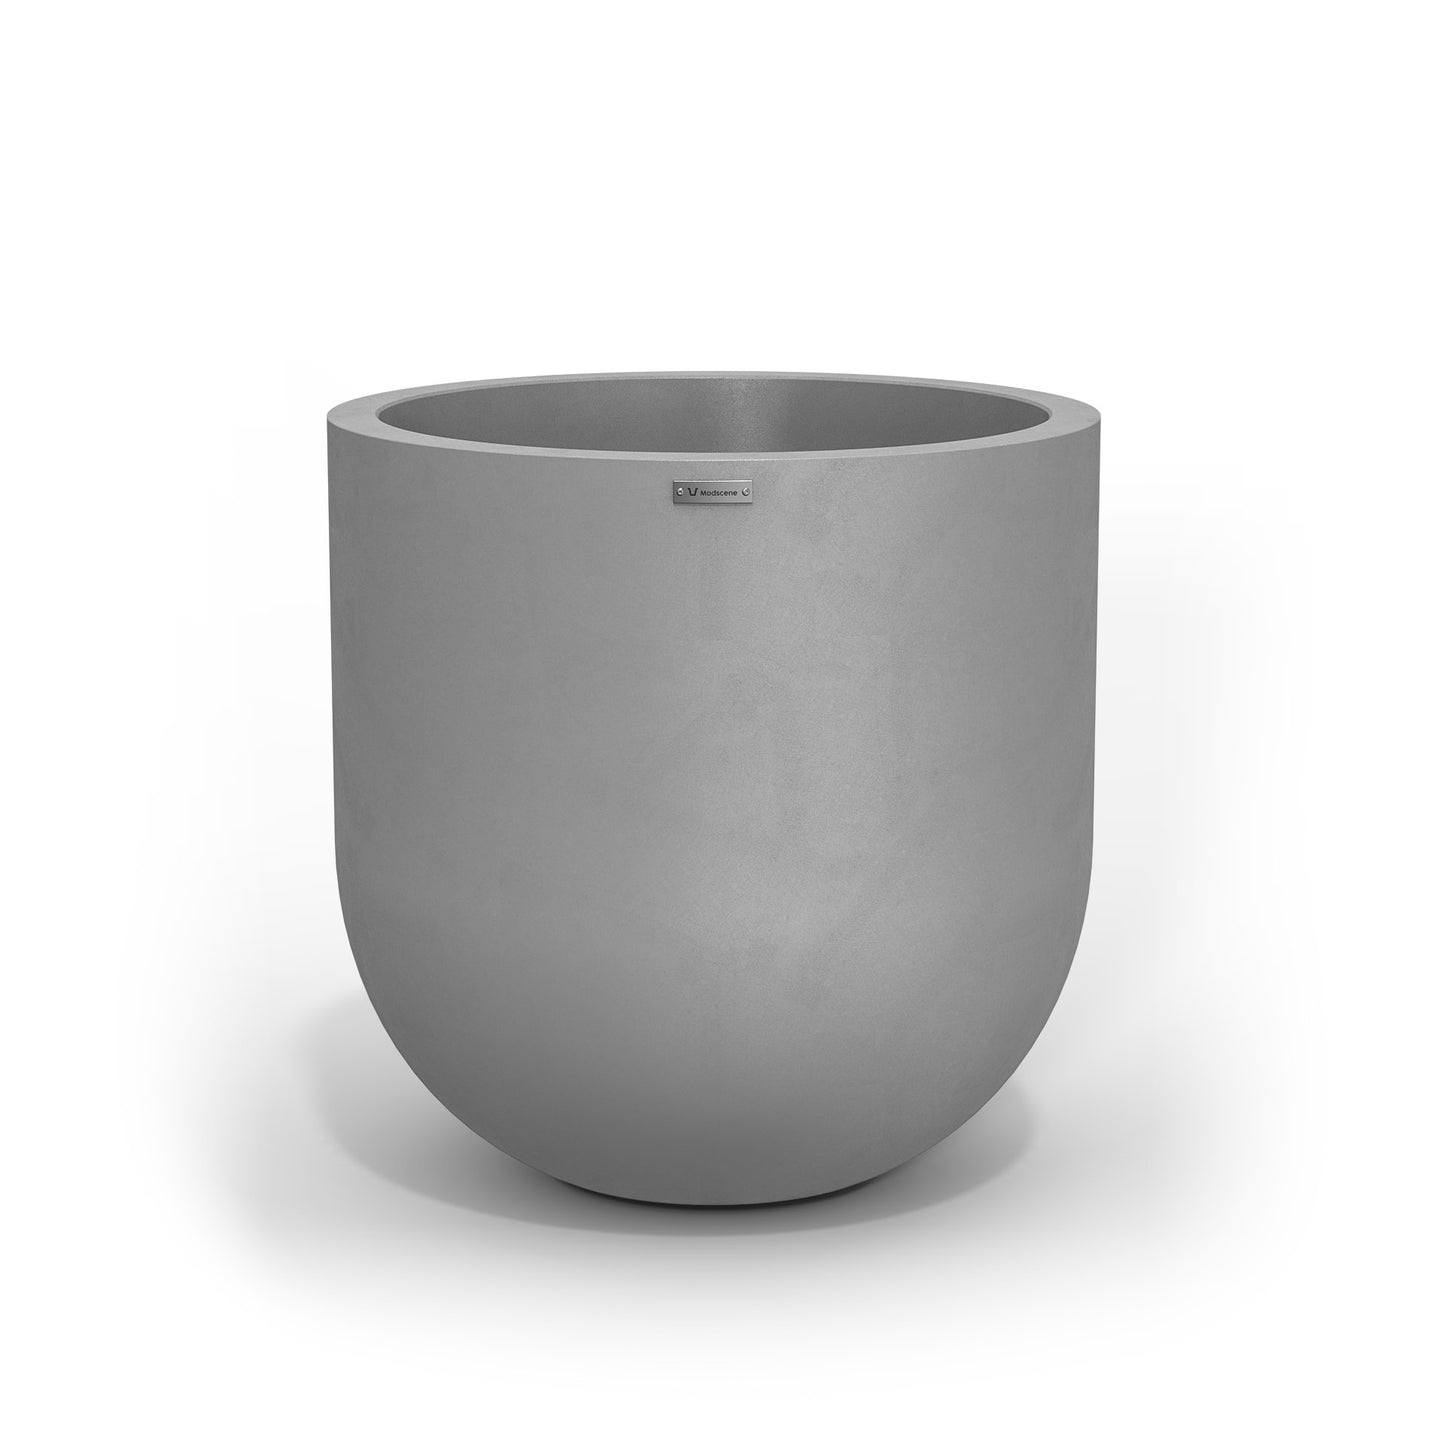 Large Modscene planter pot in a light grey colour with a concrete look